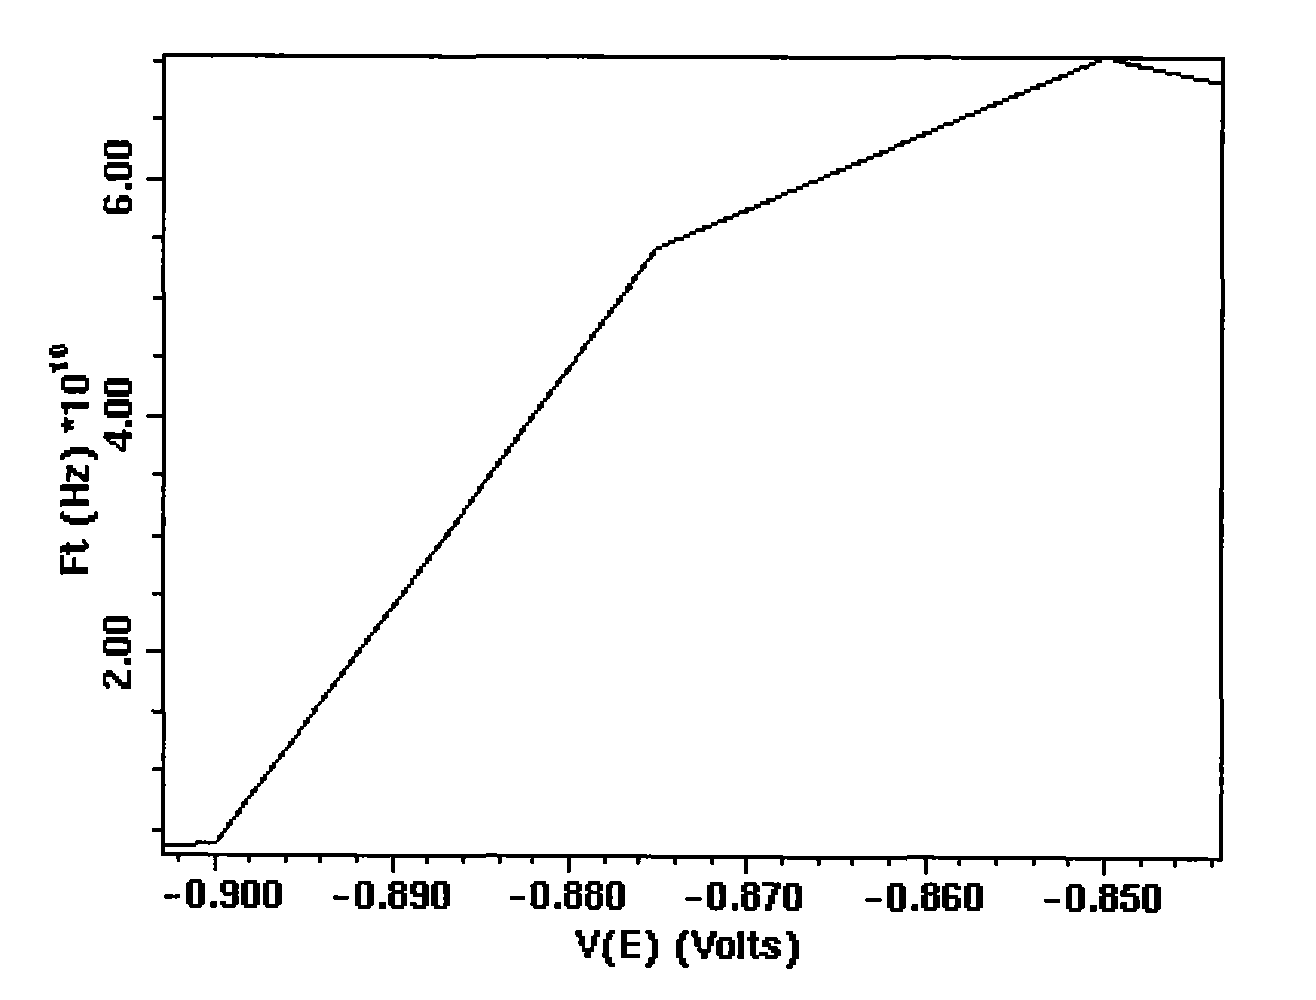 HBT structure with controllable working frequency in RF field